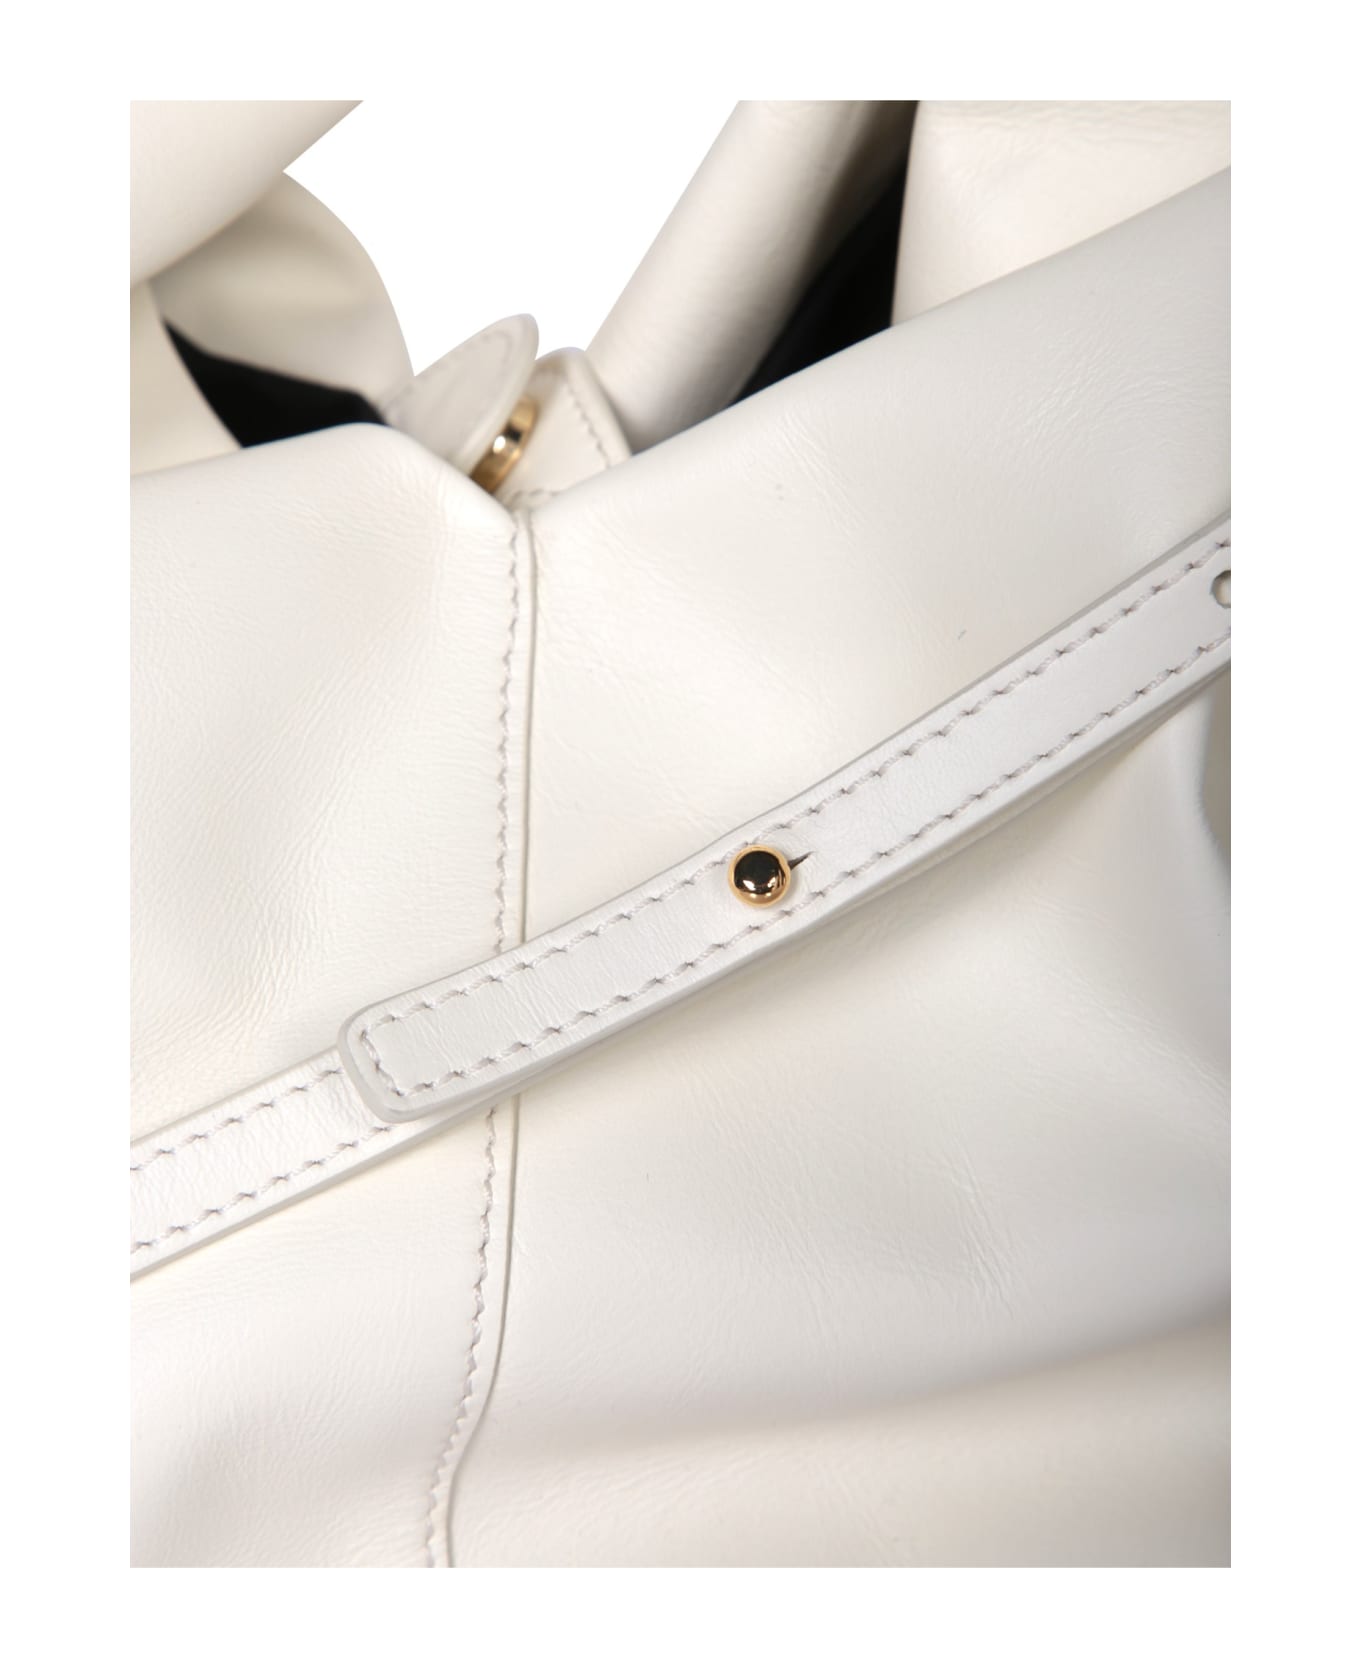 J.W. Anderson White Leather Hobo Twister Bag - OFFWHITE